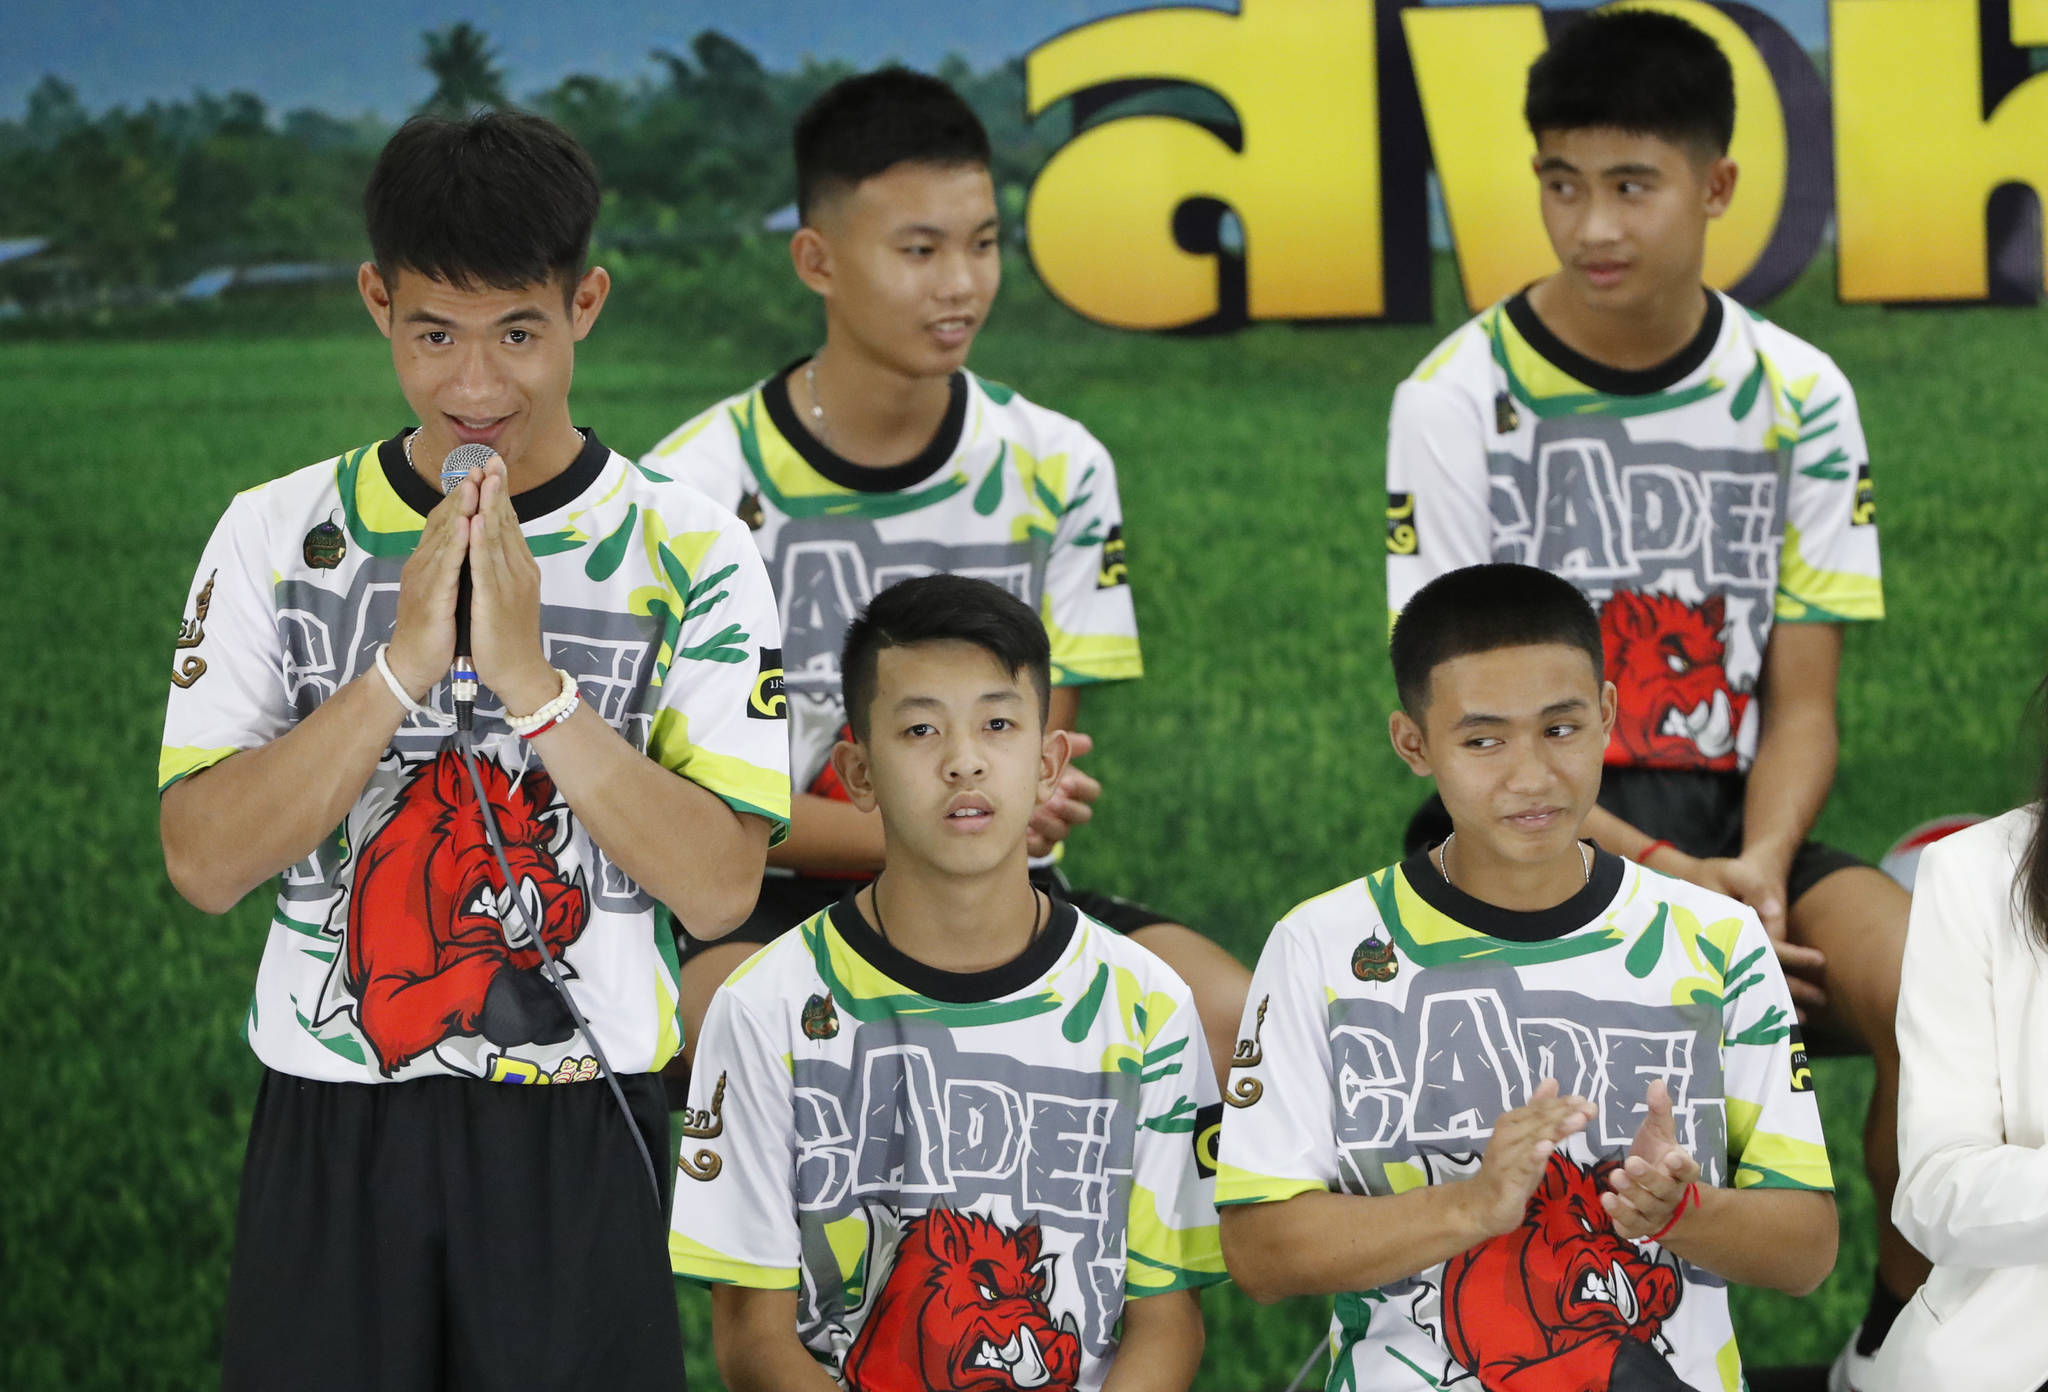 Coach Ekkapol Janthawong, left, and members of the rescued soccer team express their thanks during a press conference discussing their experience of being trapped in a flooded cave, in Chiang Rai, northern Thailand, Wednesday, July 18, 2018. The 12 boys and their soccer coach rescued after being trapped in a flooded cave in northern Thailand are recovering well and are eager to eat their favorite comfort foods after their expected discharge from a hospital soon. (AP Photo/Vincent Thian)